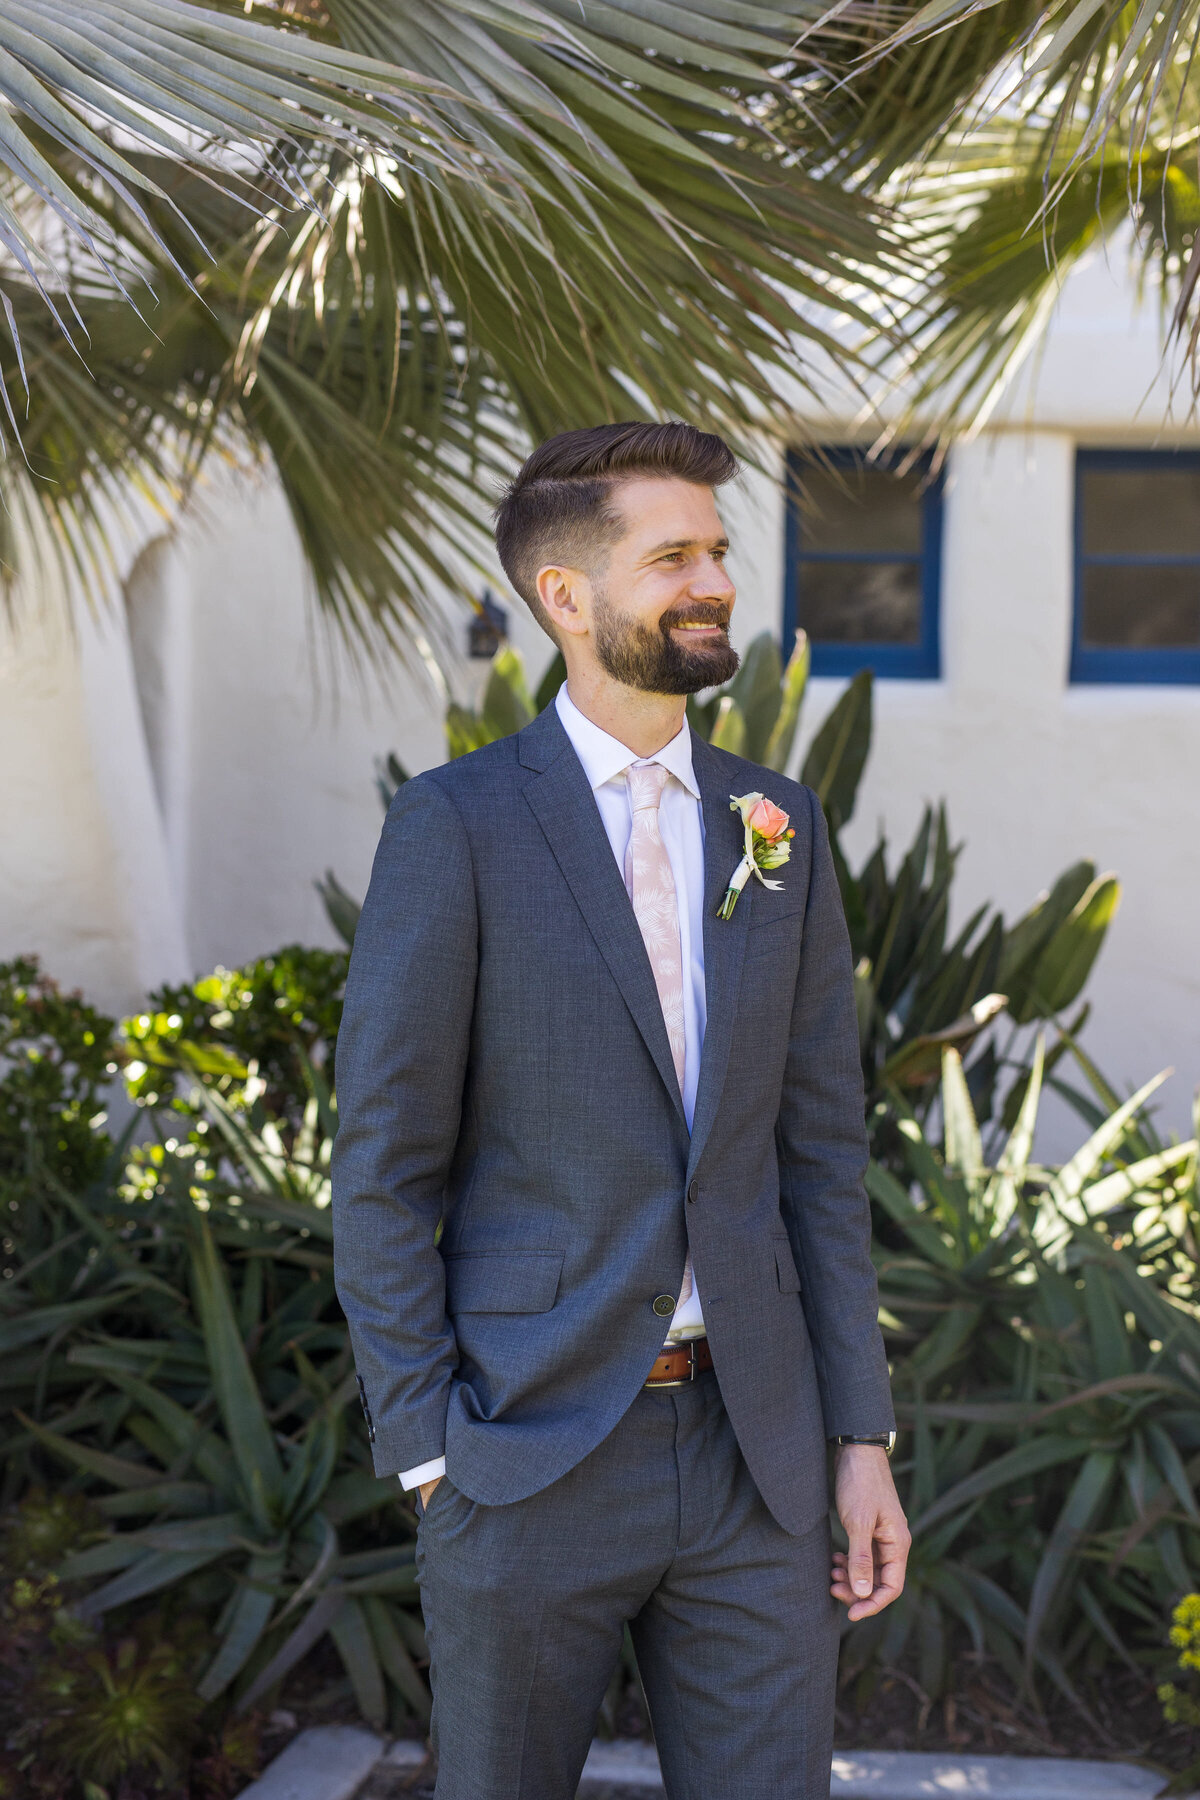 valerie-and-jack-southern-california-wedding-planner-the-pretty-palm-leaf-event-9